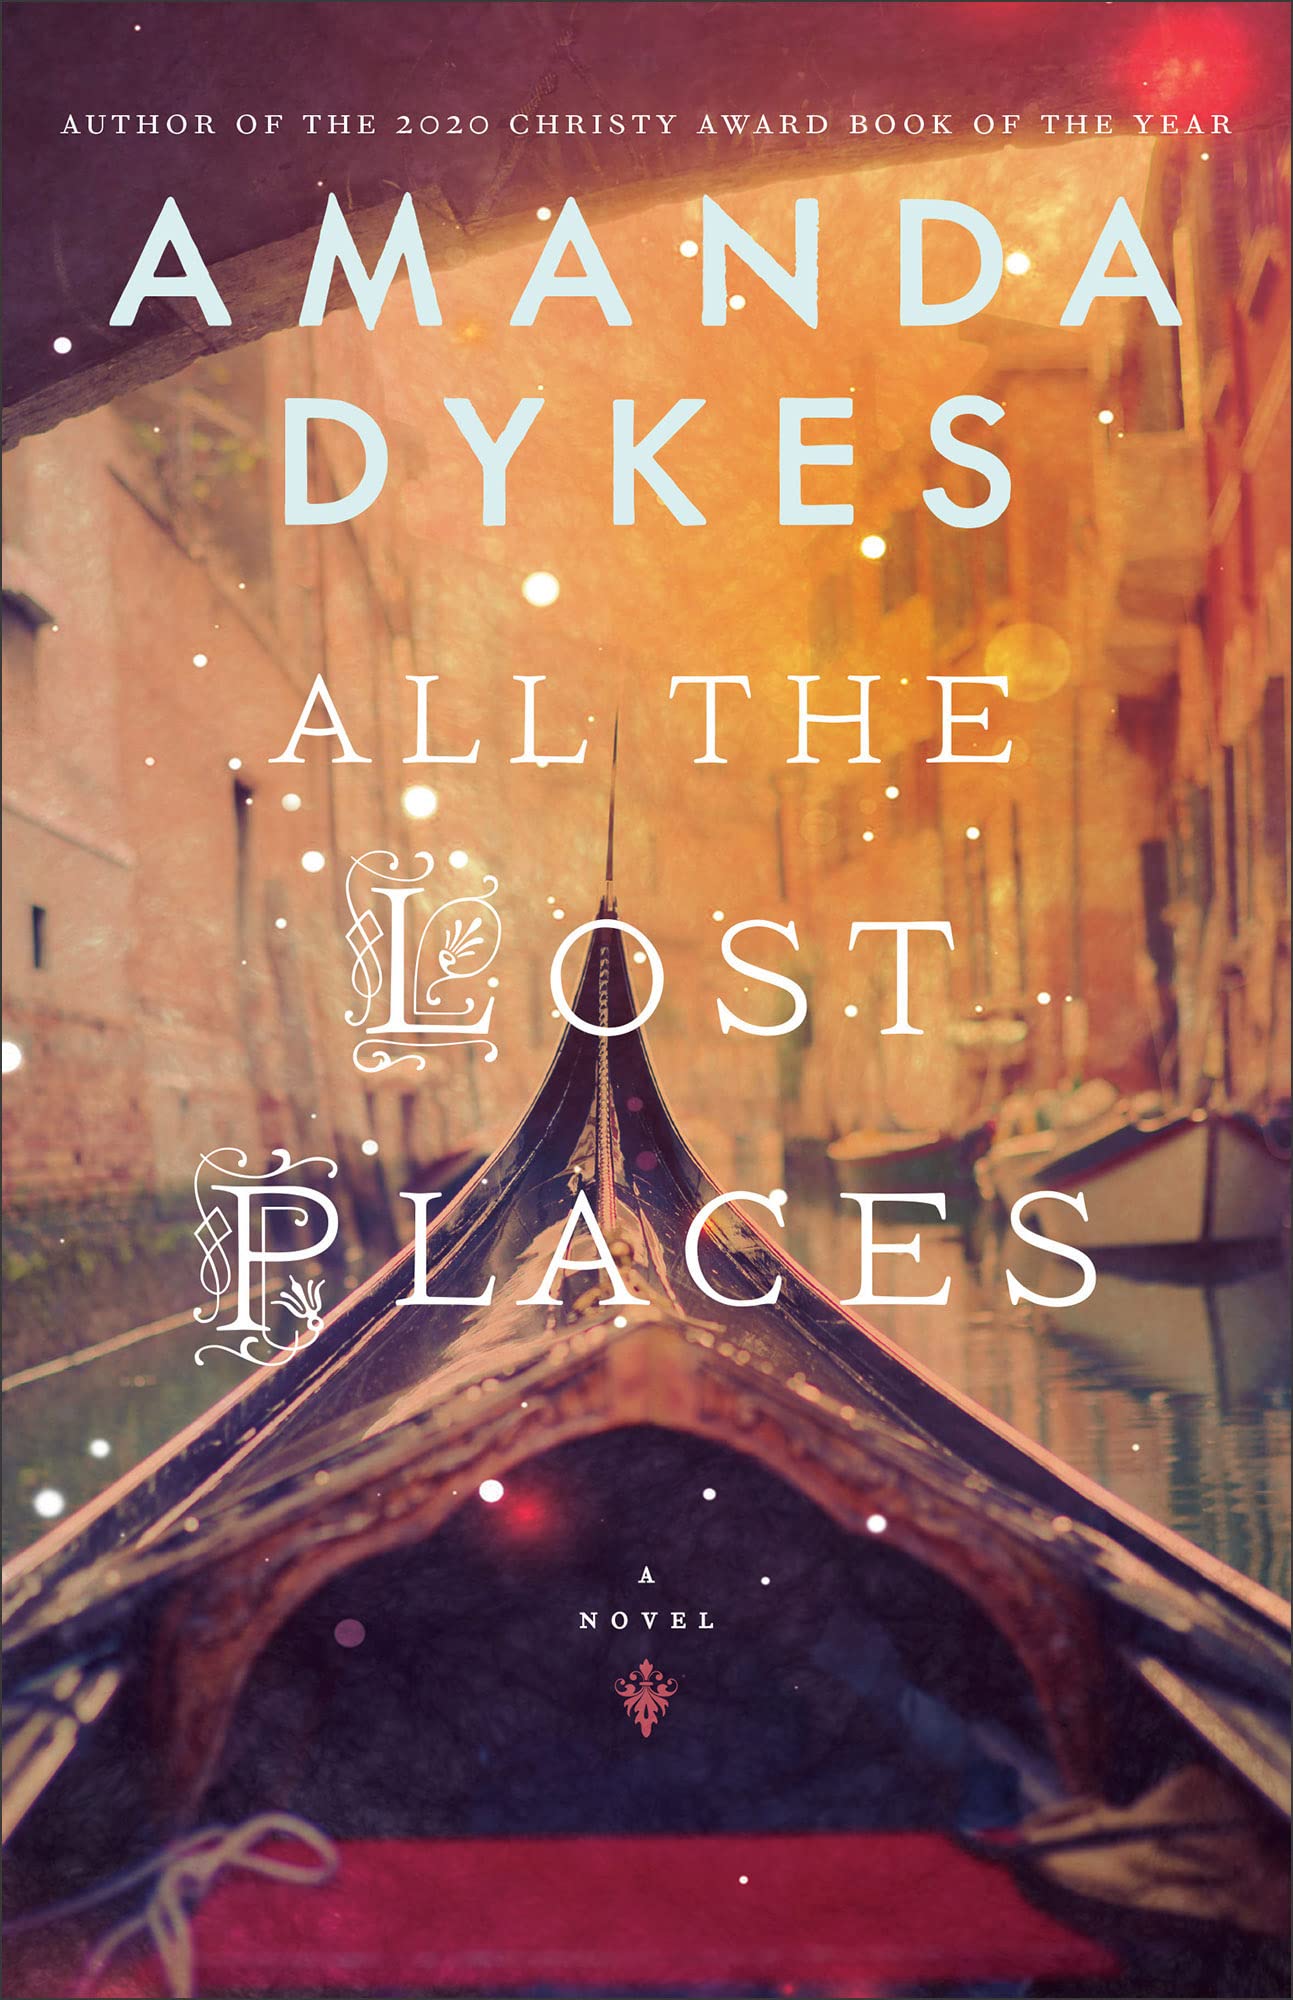 Image for "All the Lost Places"